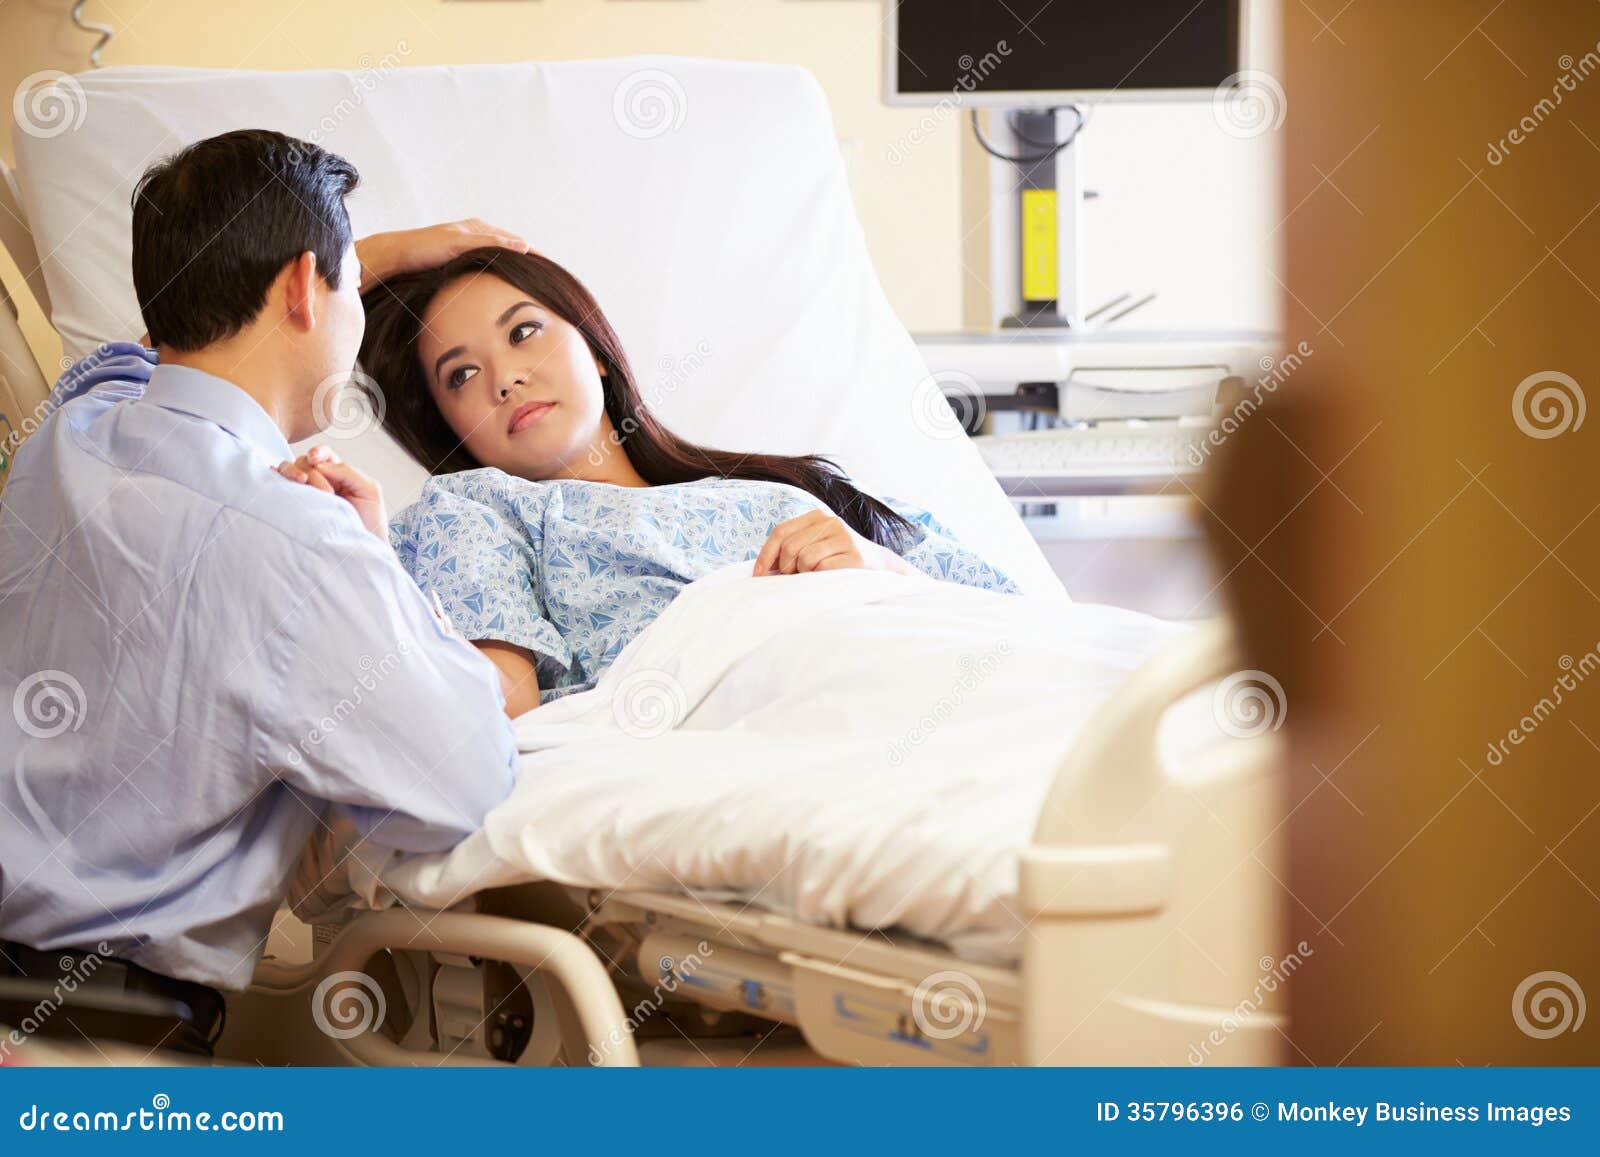 Husband Visiting Wife in Hospital Stock Photo